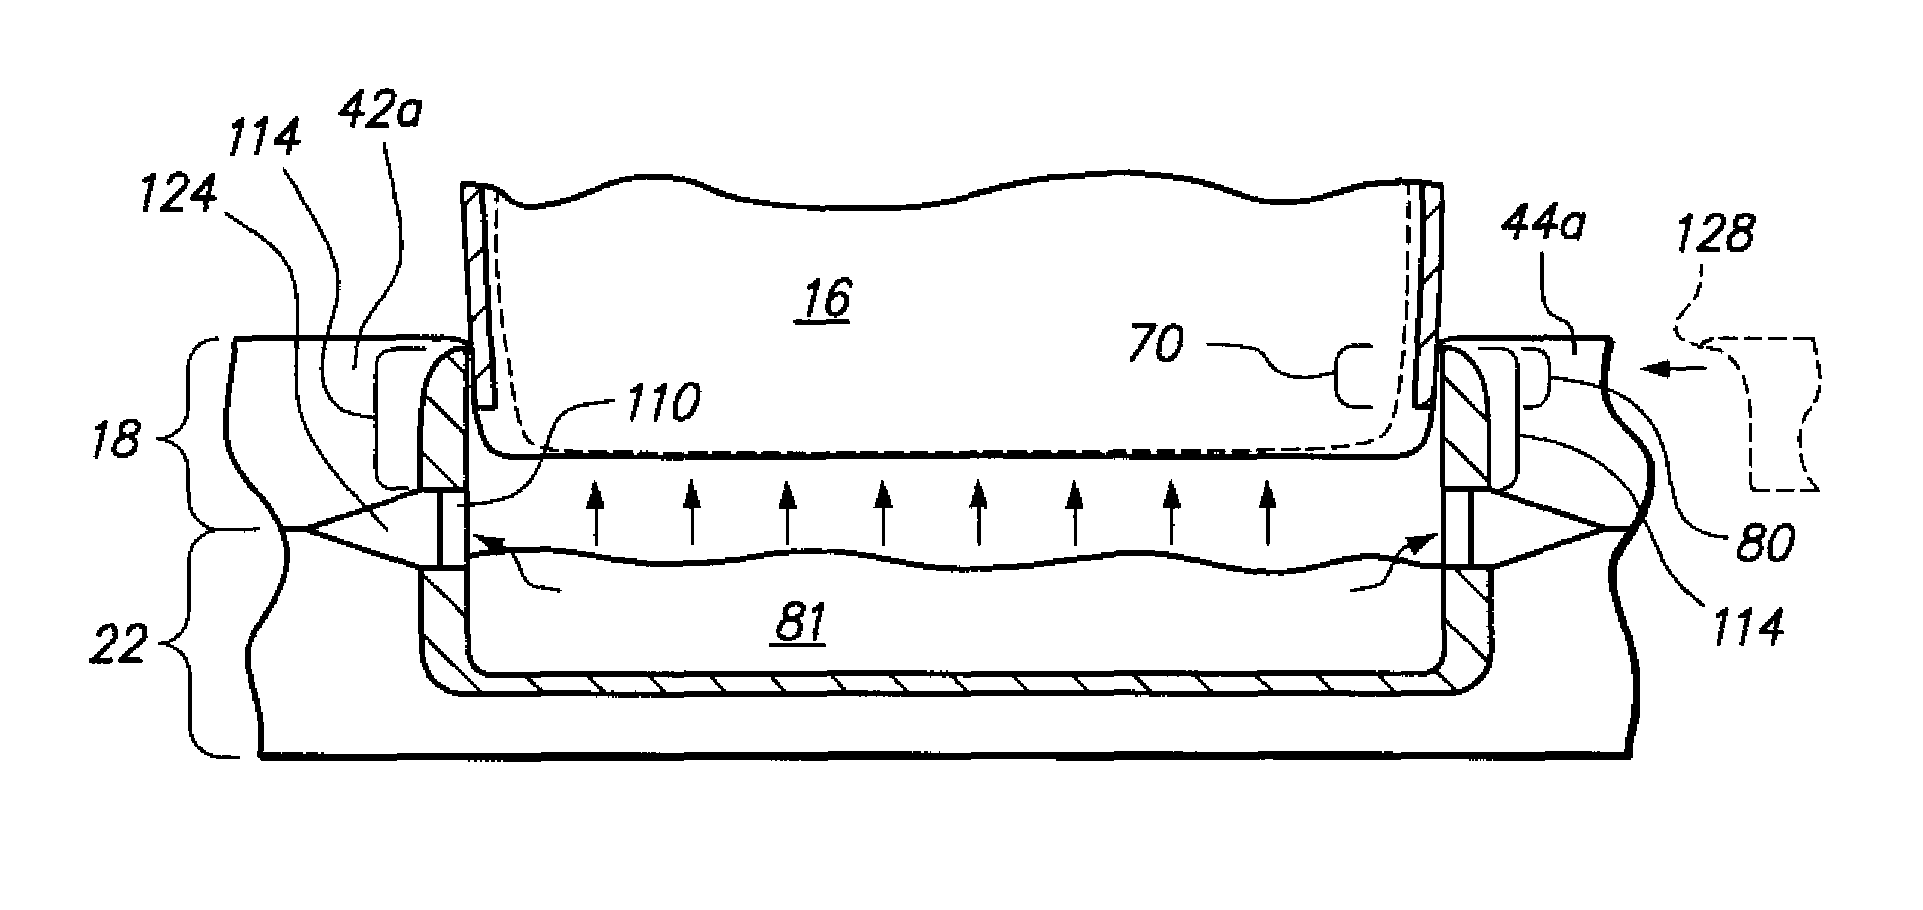 Method and product for manufacturing vulcanized footwear or cupsole footwear